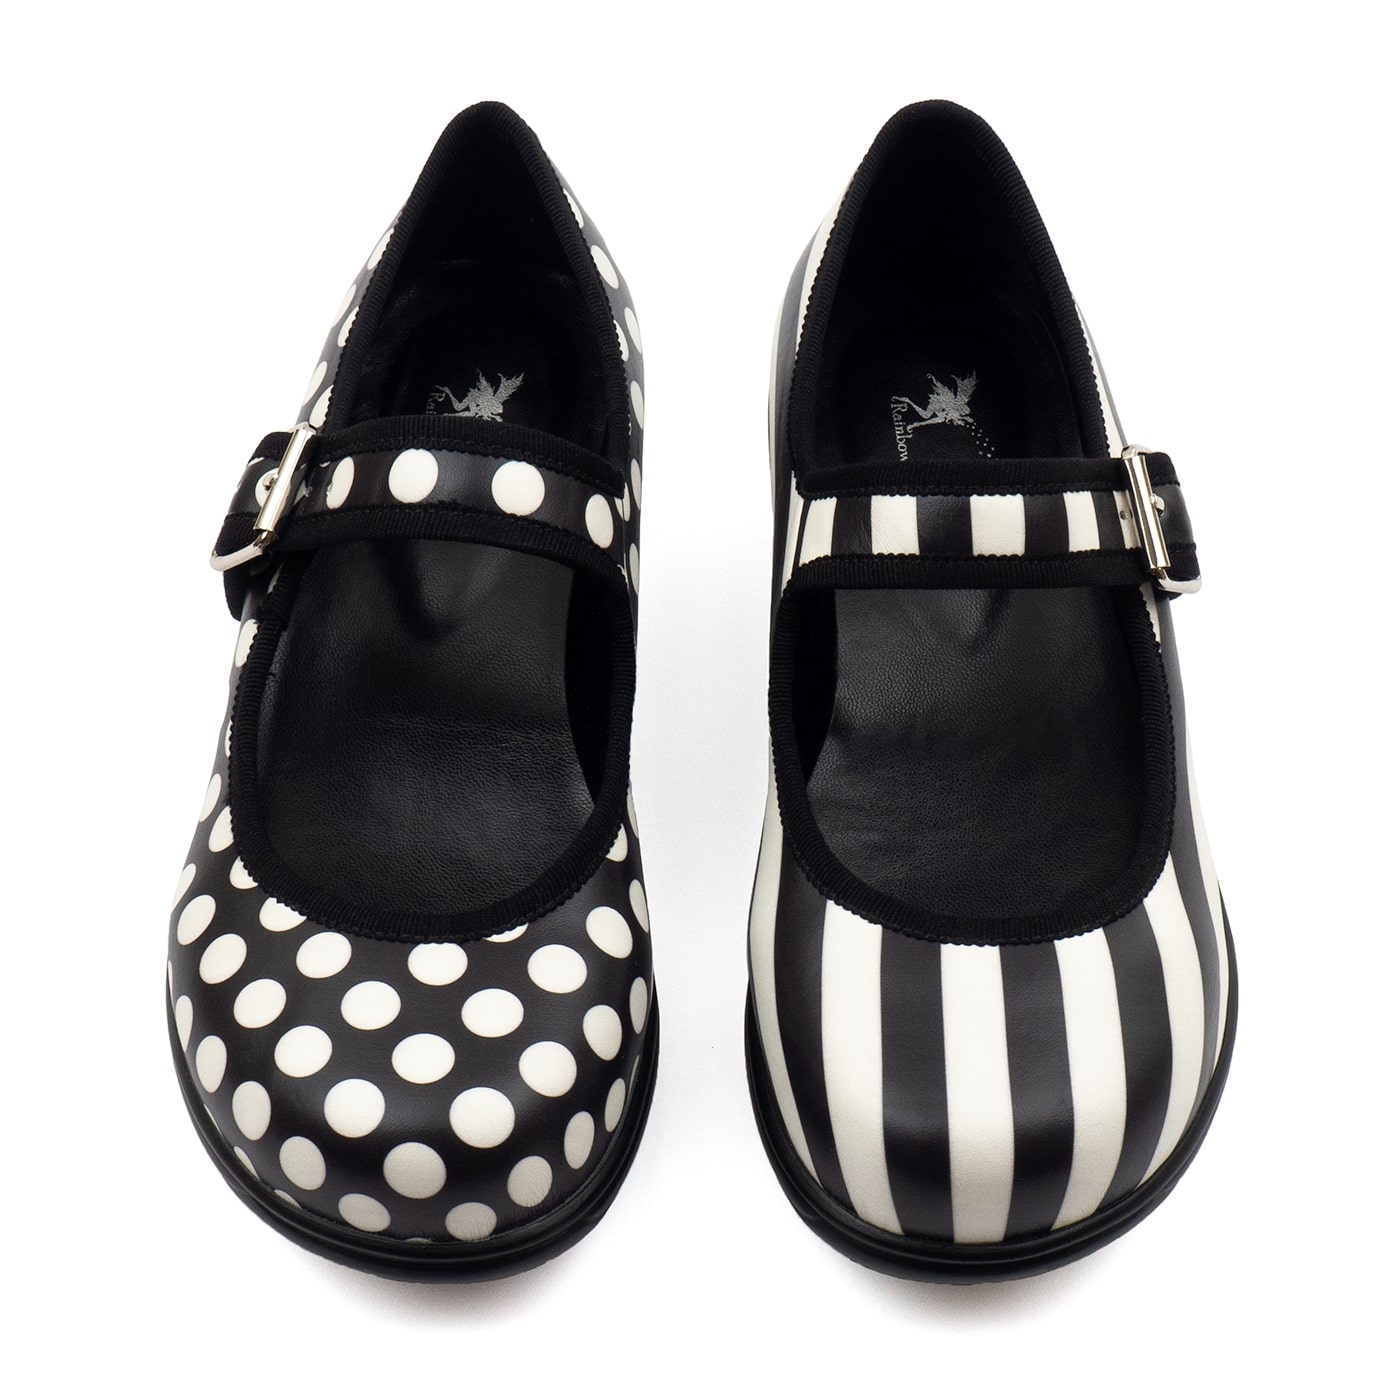 Monochrome Mary Janes by RainbowsAndFairies.com (Black & White - Polka Dots - Stripes - Mismatched Shoes - Shoes - Pair & A Spare) - SKU: FW_MARYJ_MONOC_ORG - Pic 05